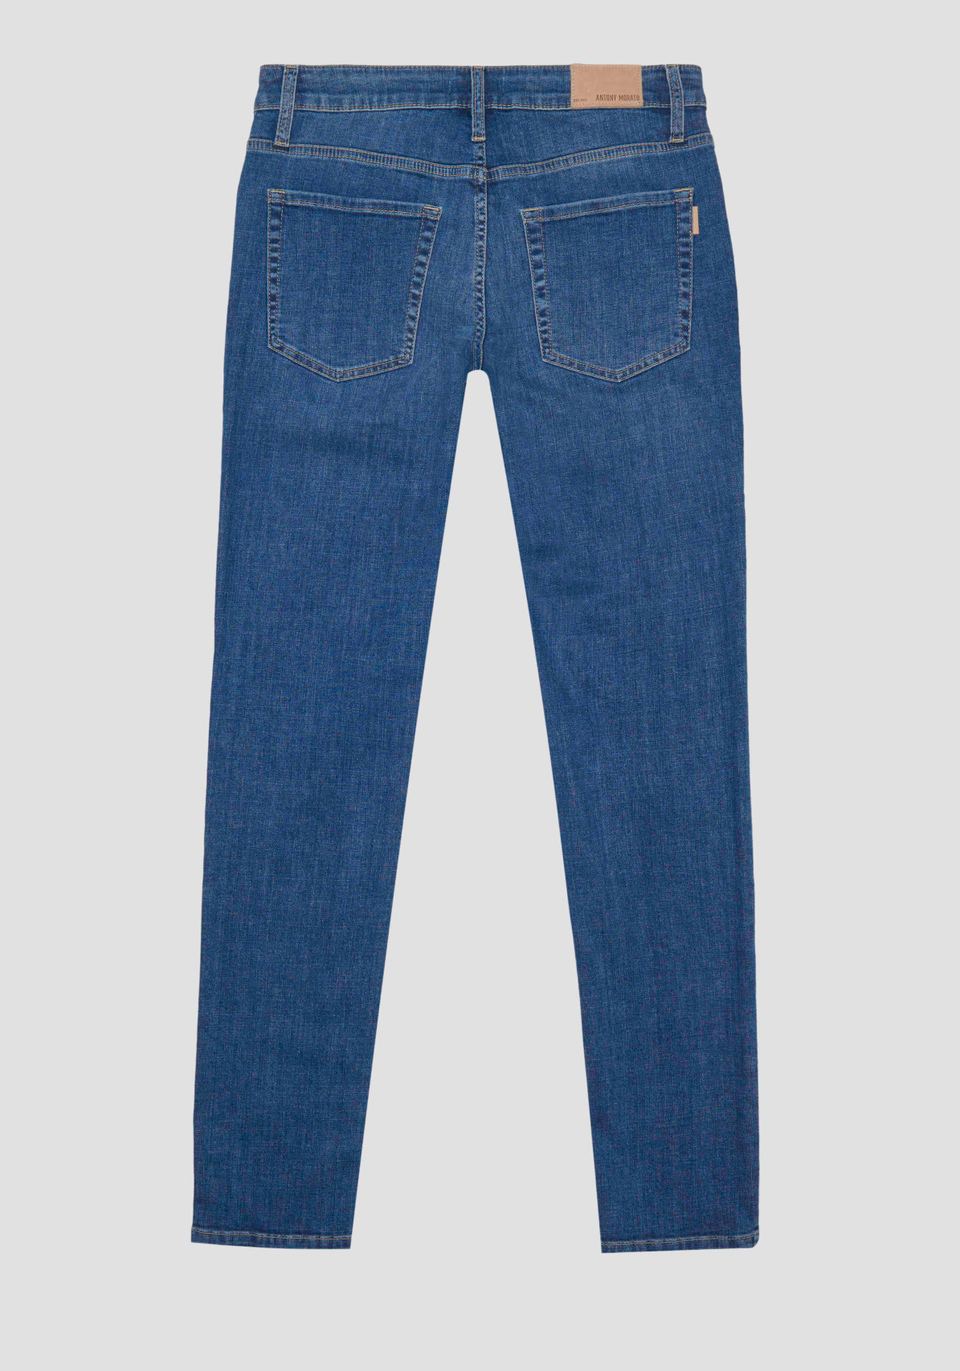 JEANS "OZZY" TAPERED FIT IN ICONIC BASIC BLUE DENIM - Antony Morato Online Shop